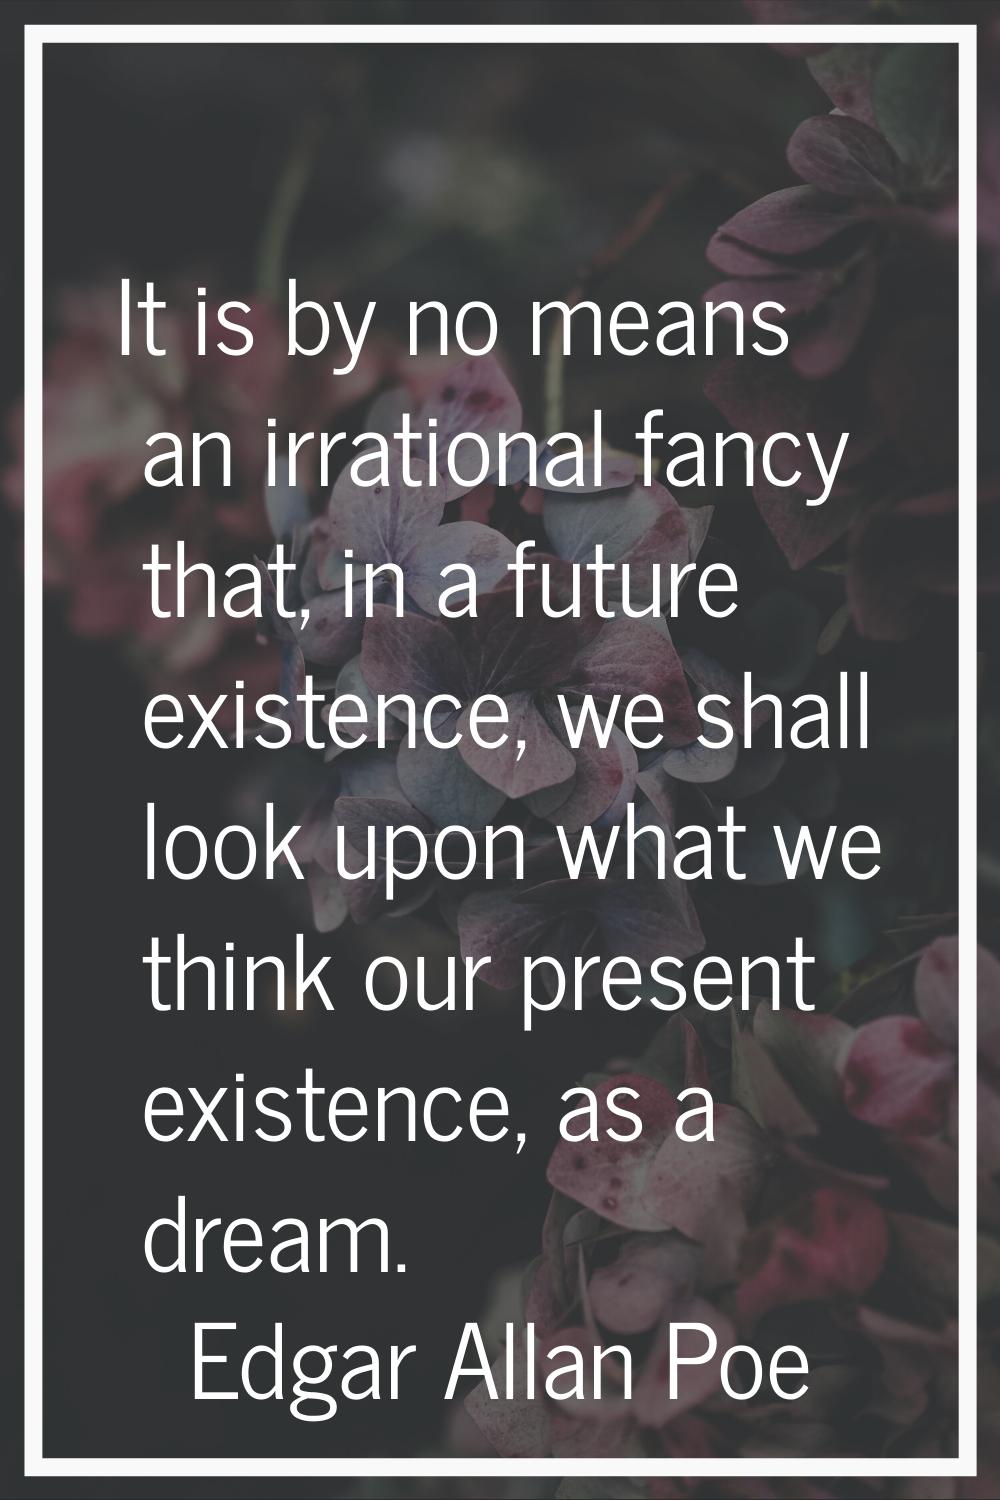 It is by no means an irrational fancy that, in a future existence, we shall look upon what we think